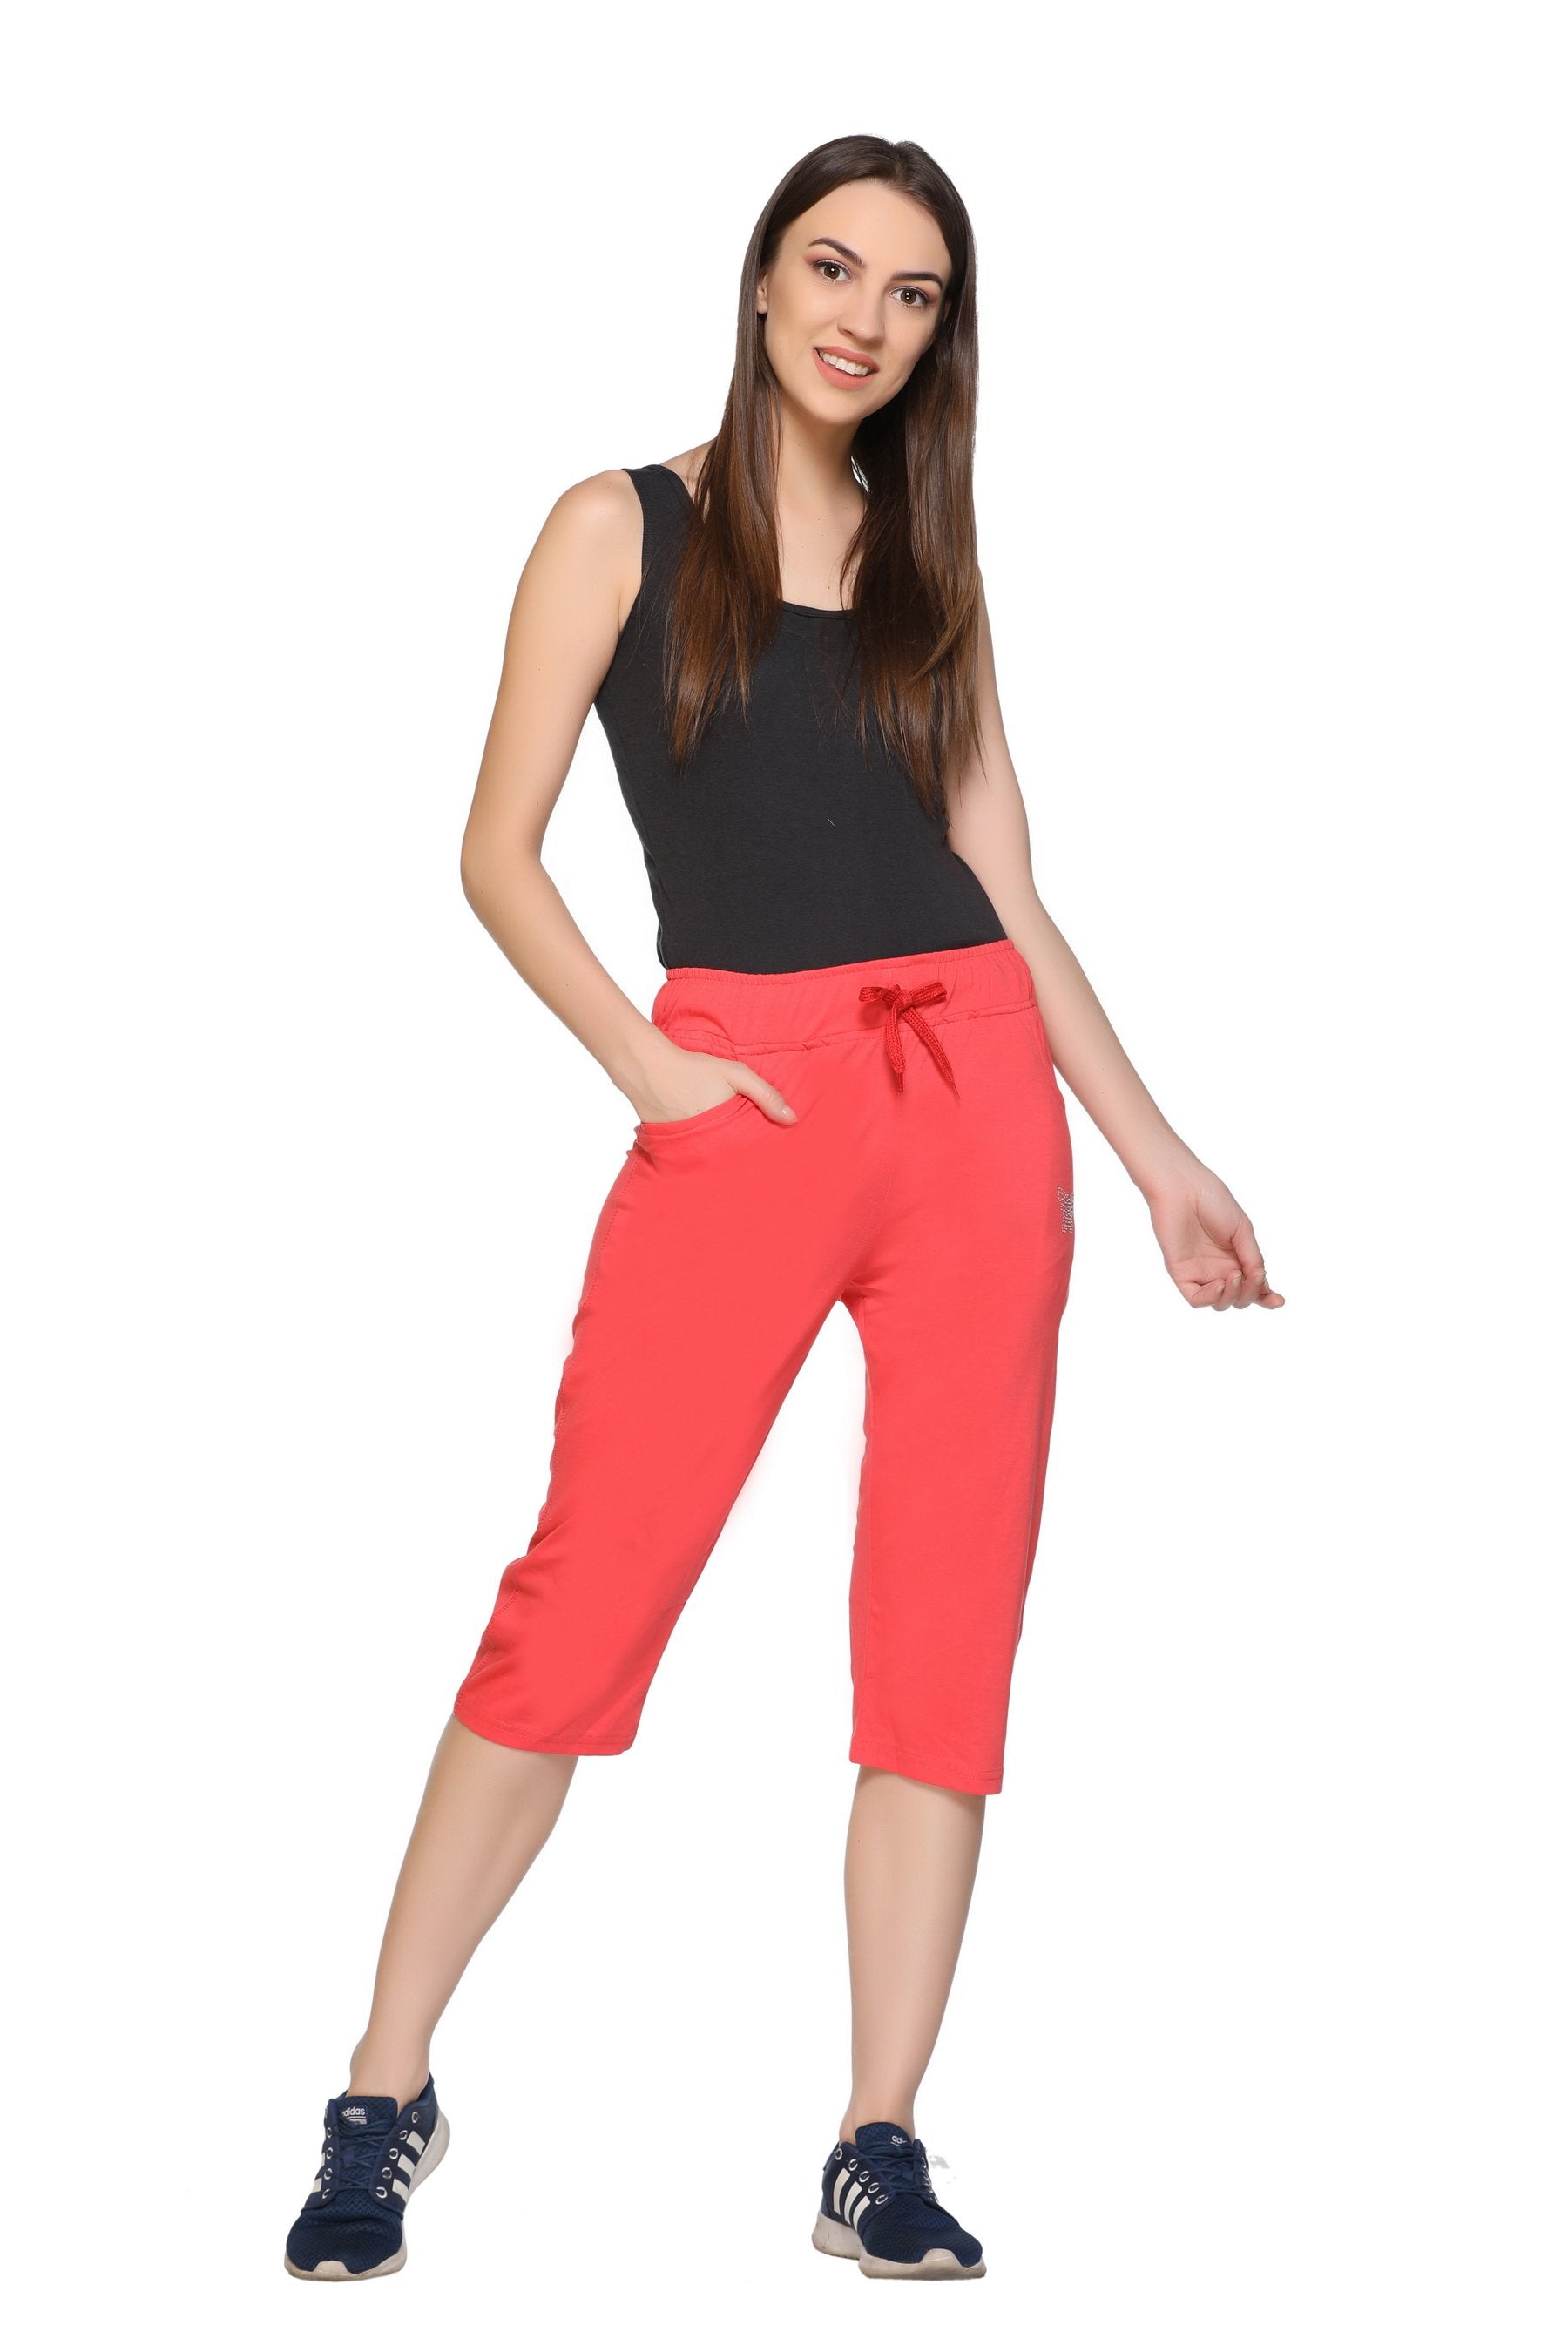 Stylish Red Cotton Half Capris For Women online in India